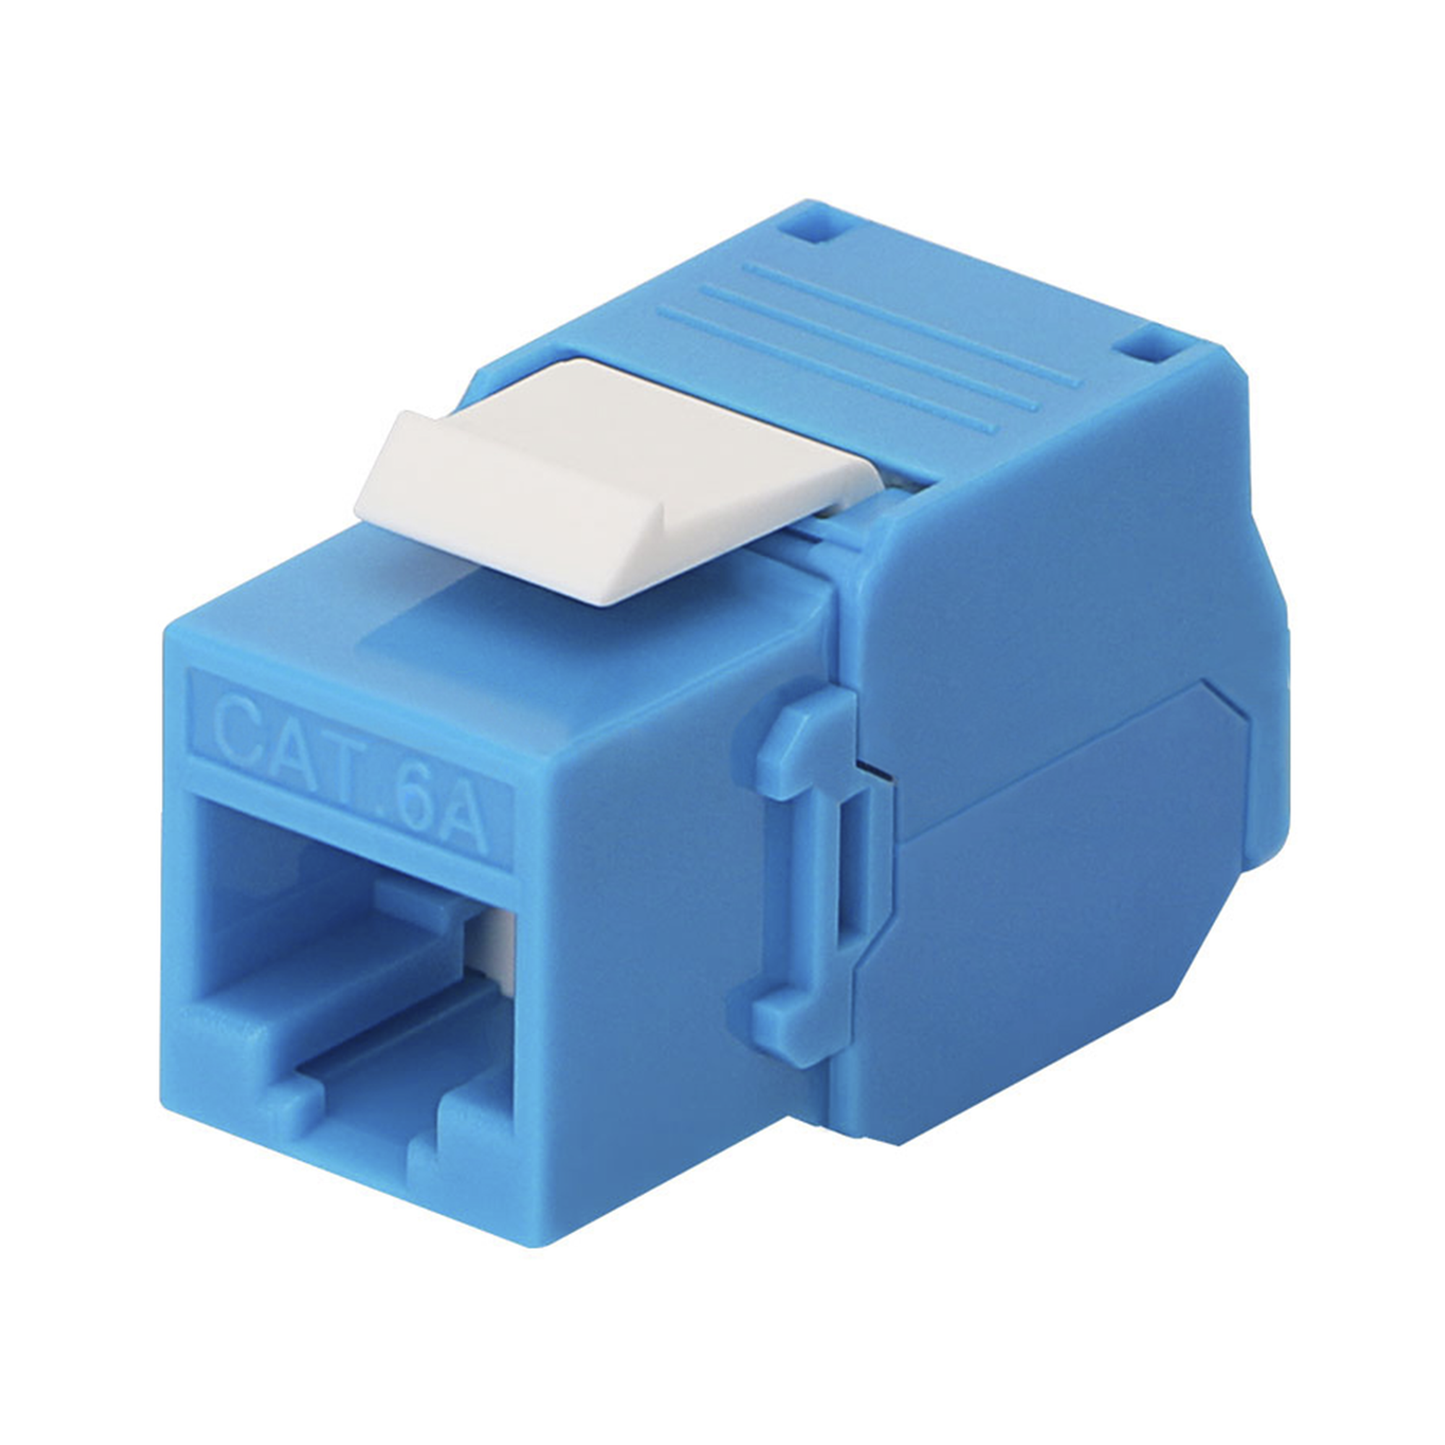 Cat6A Keystone Jack Module (toolless), with 180º angled termination, Blue Color, Compatible with Linkedpro Faceplate and Patchpanel